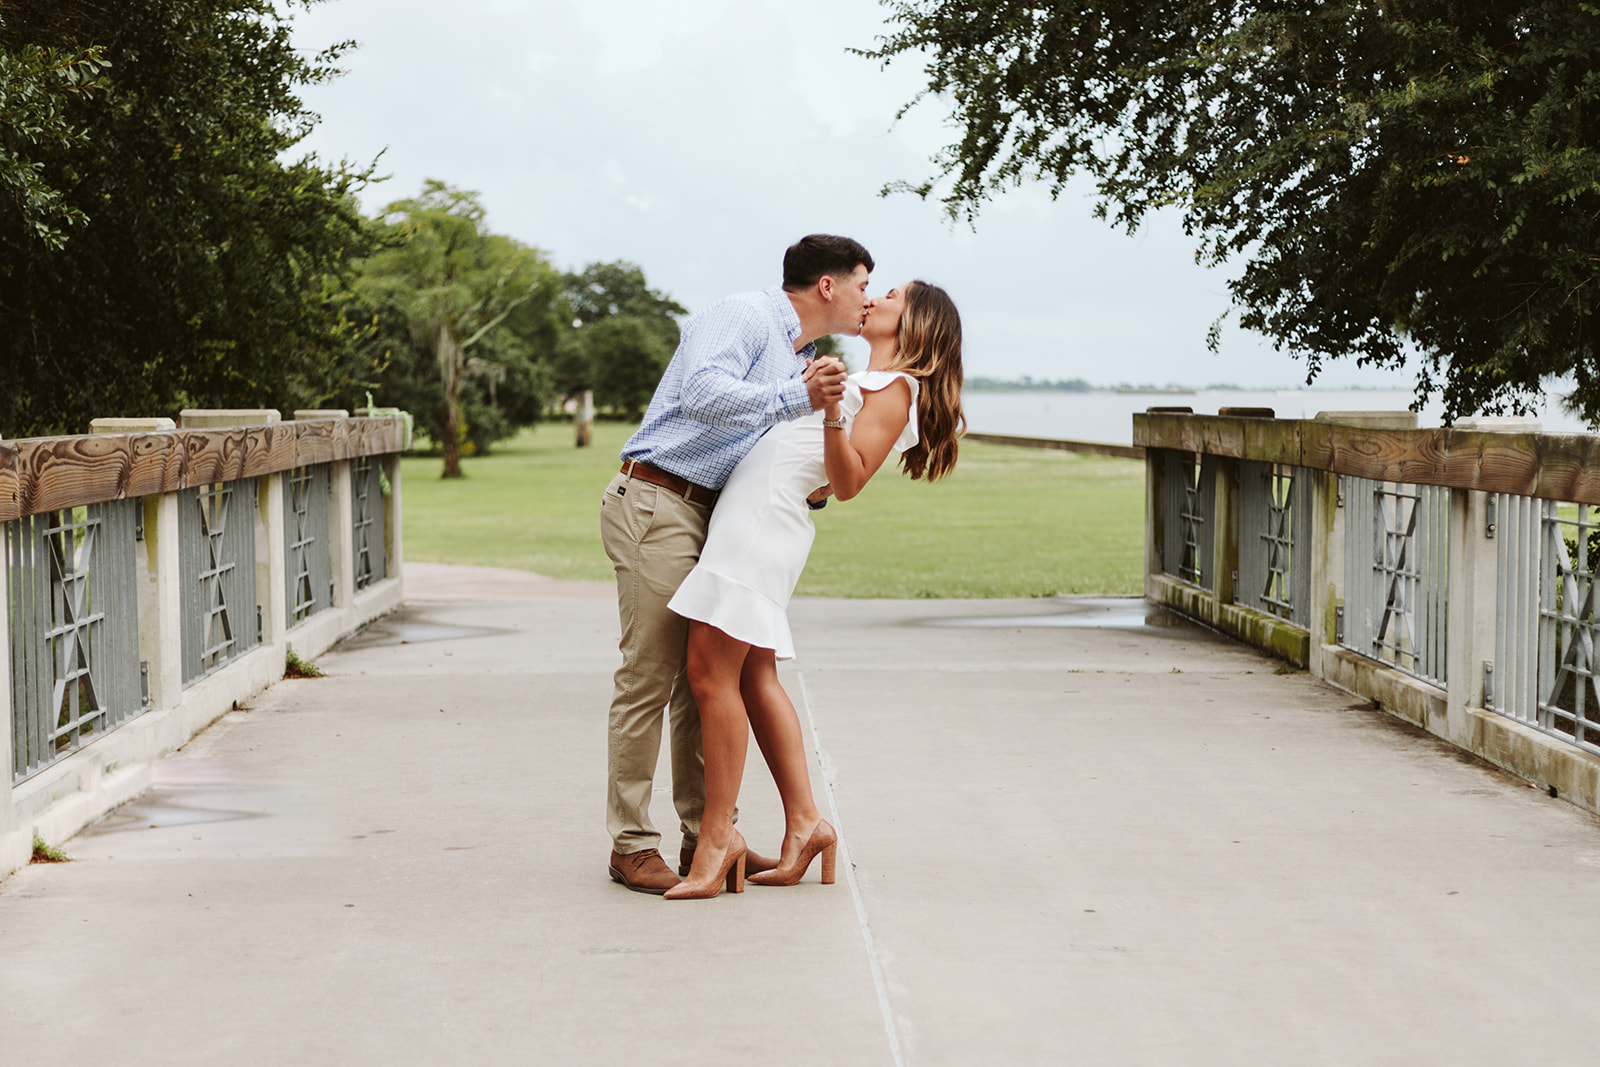 Engagement Session Locations